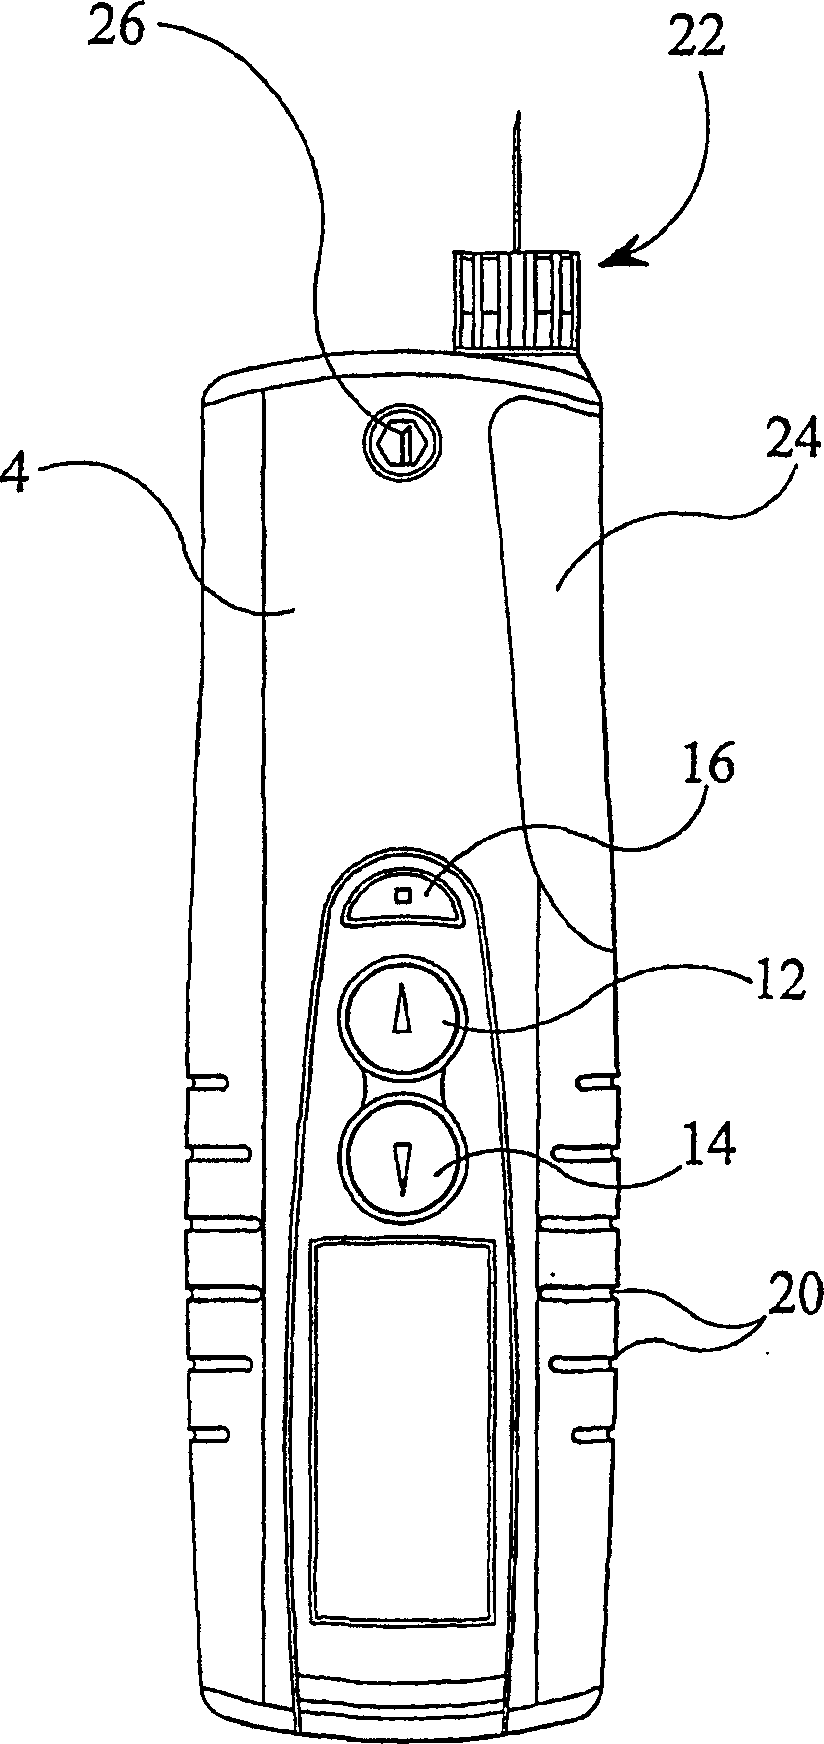 Drive mechanism for injection device